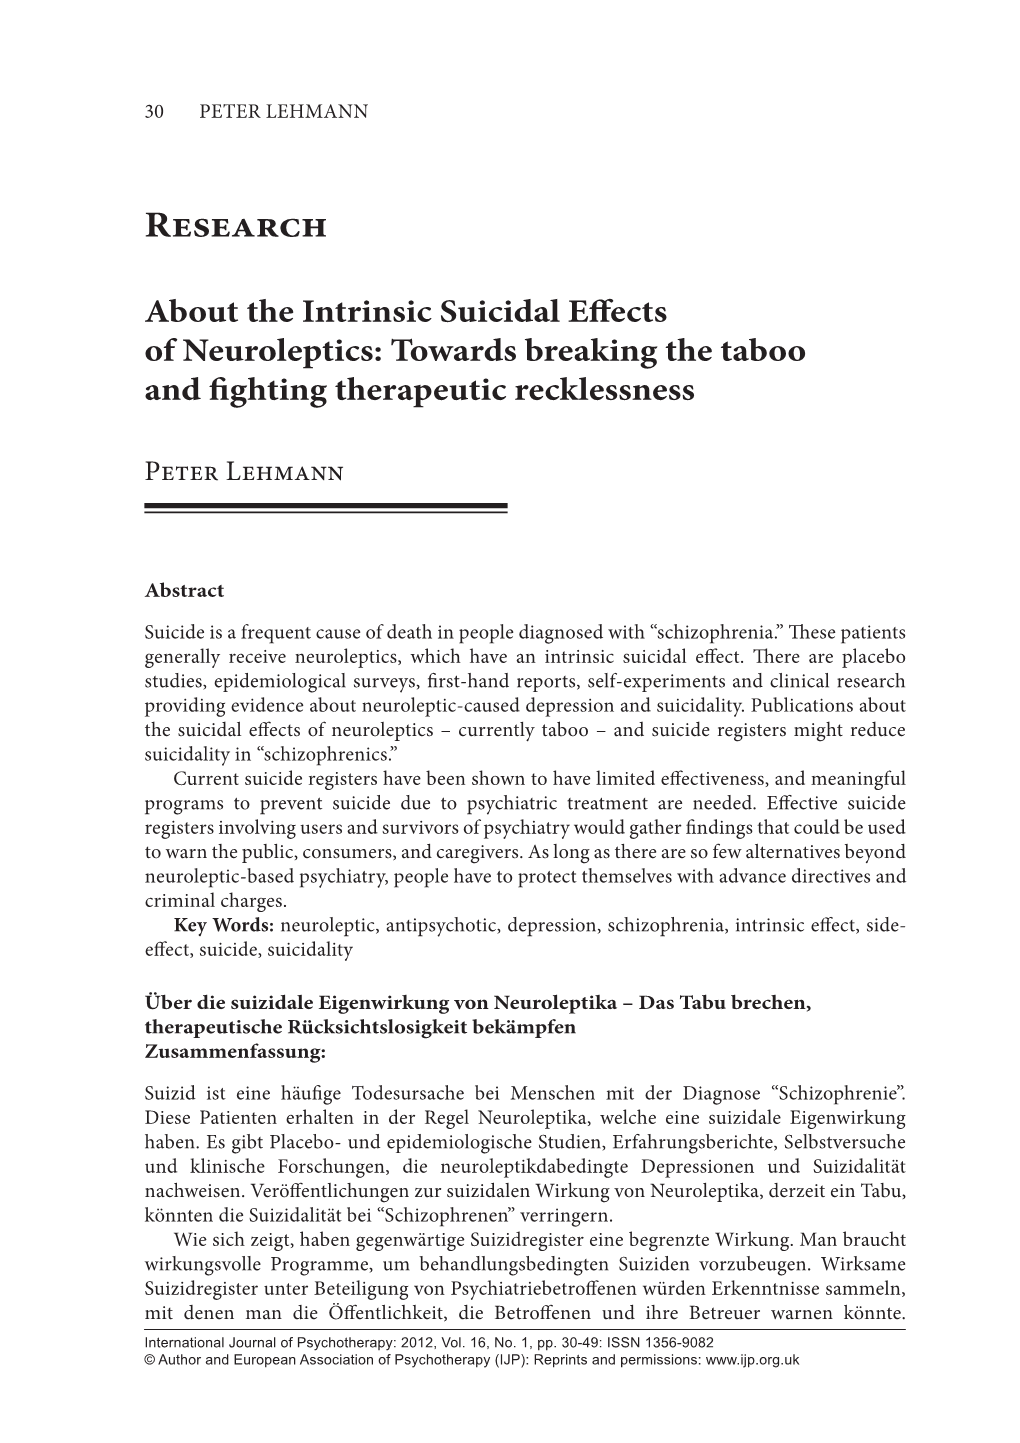 The Intrinsic Suicidal Effects of Neuroleptics: Towards Breaking the Taboo and Fighting Therapeutic Recklessness